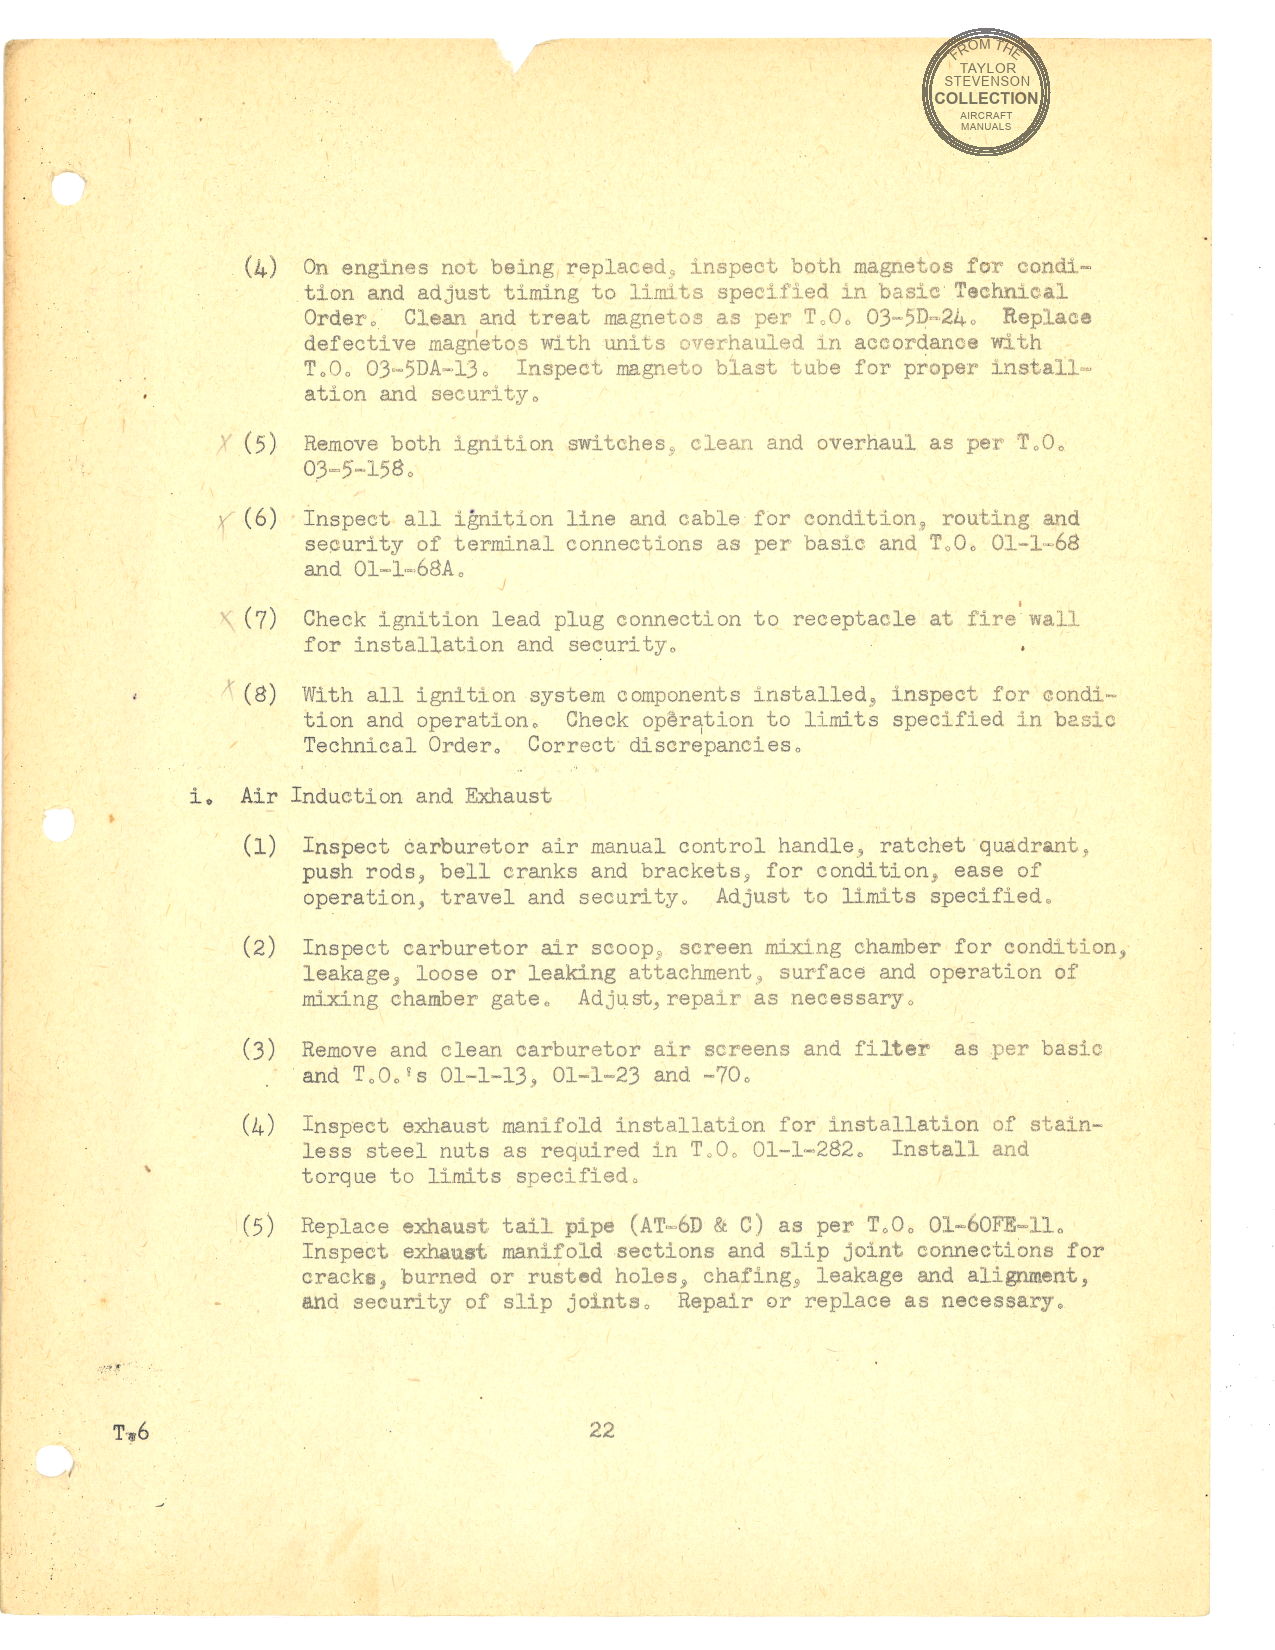 Sample page 22 from AirCorps Library document: Contractor Work Specification - Complete Reconditioning Requirements - T-6